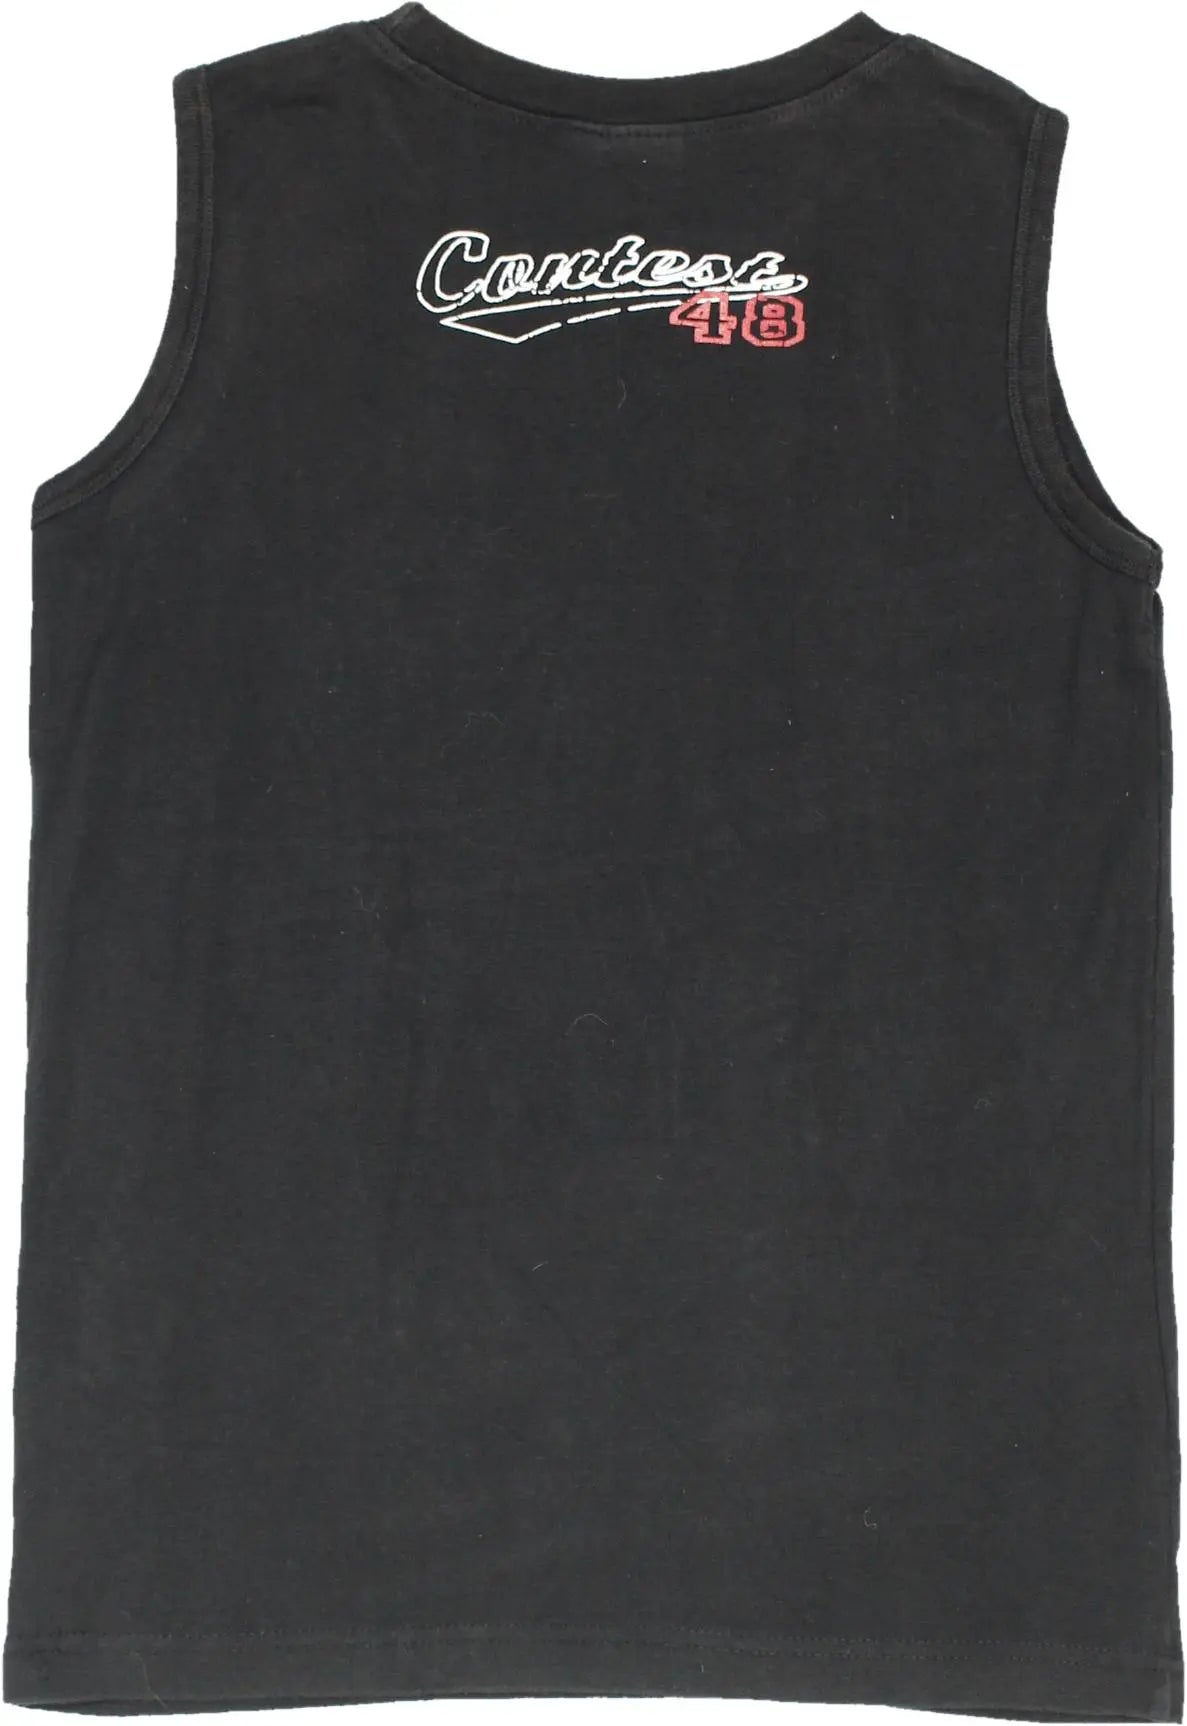 Europe Boys - Black Singlet- ThriftTale.com - Vintage and second handclothing